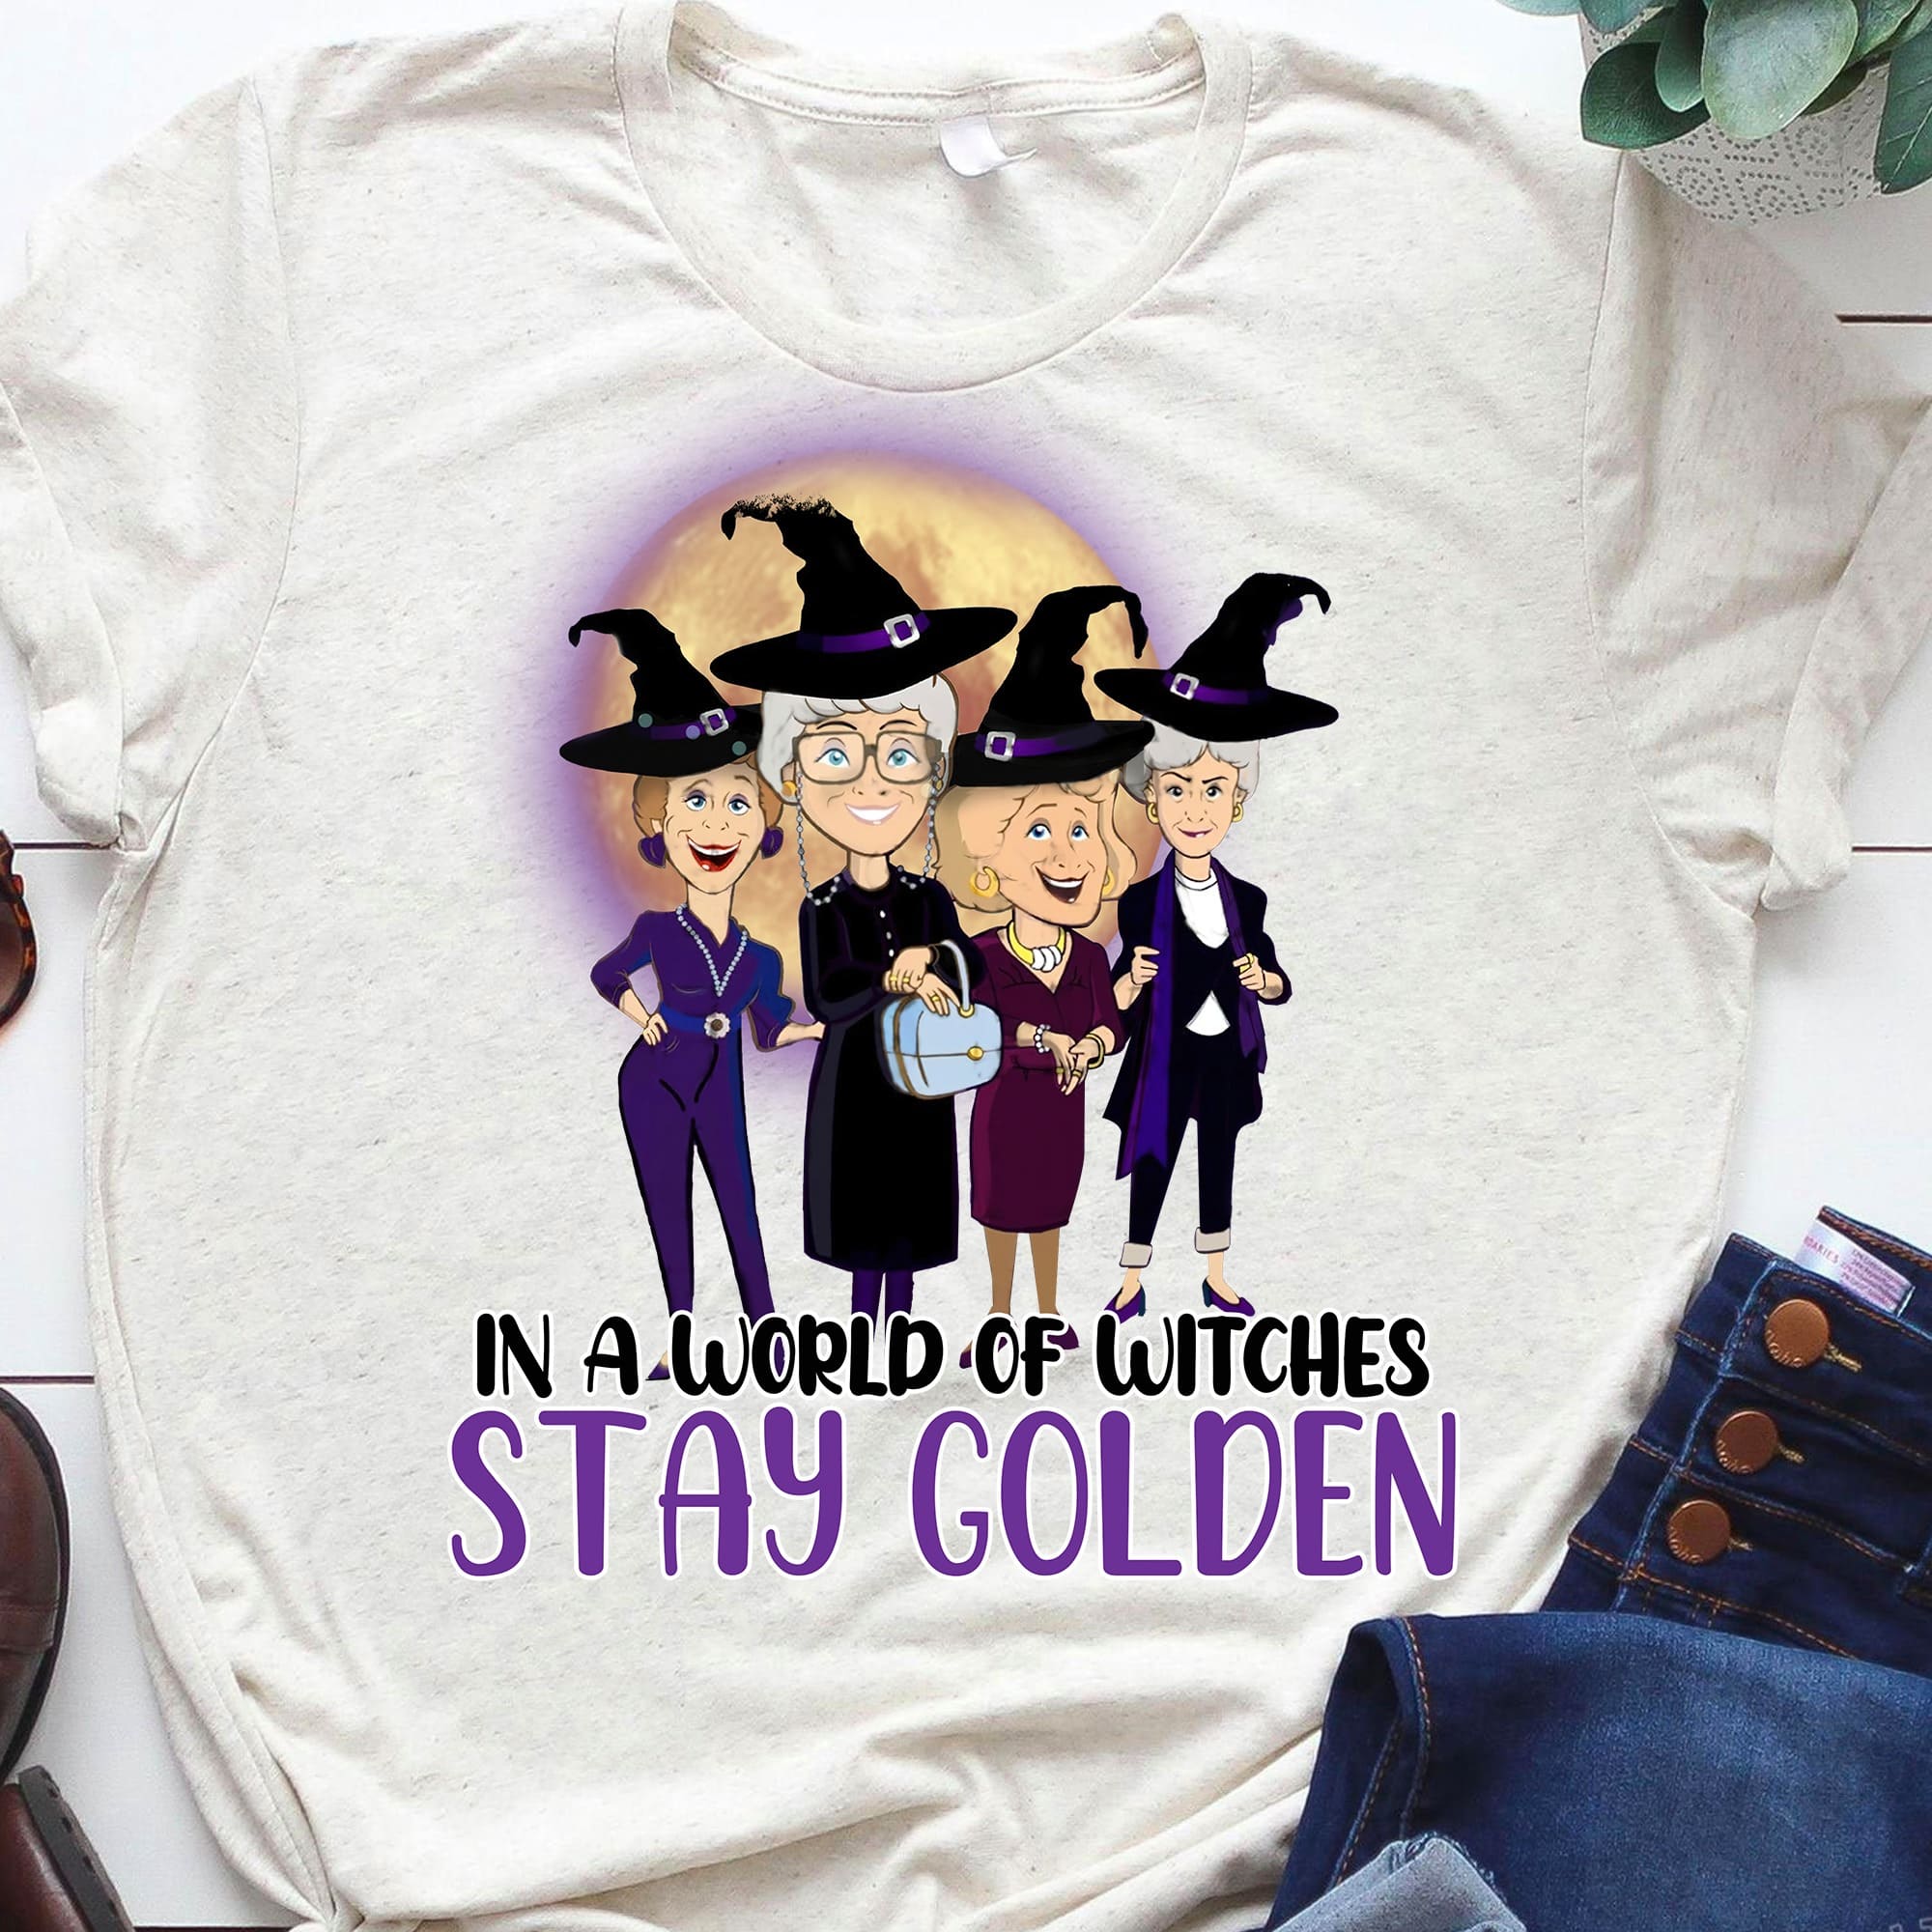 In a world of witches, stay golden - Halloween witch costume